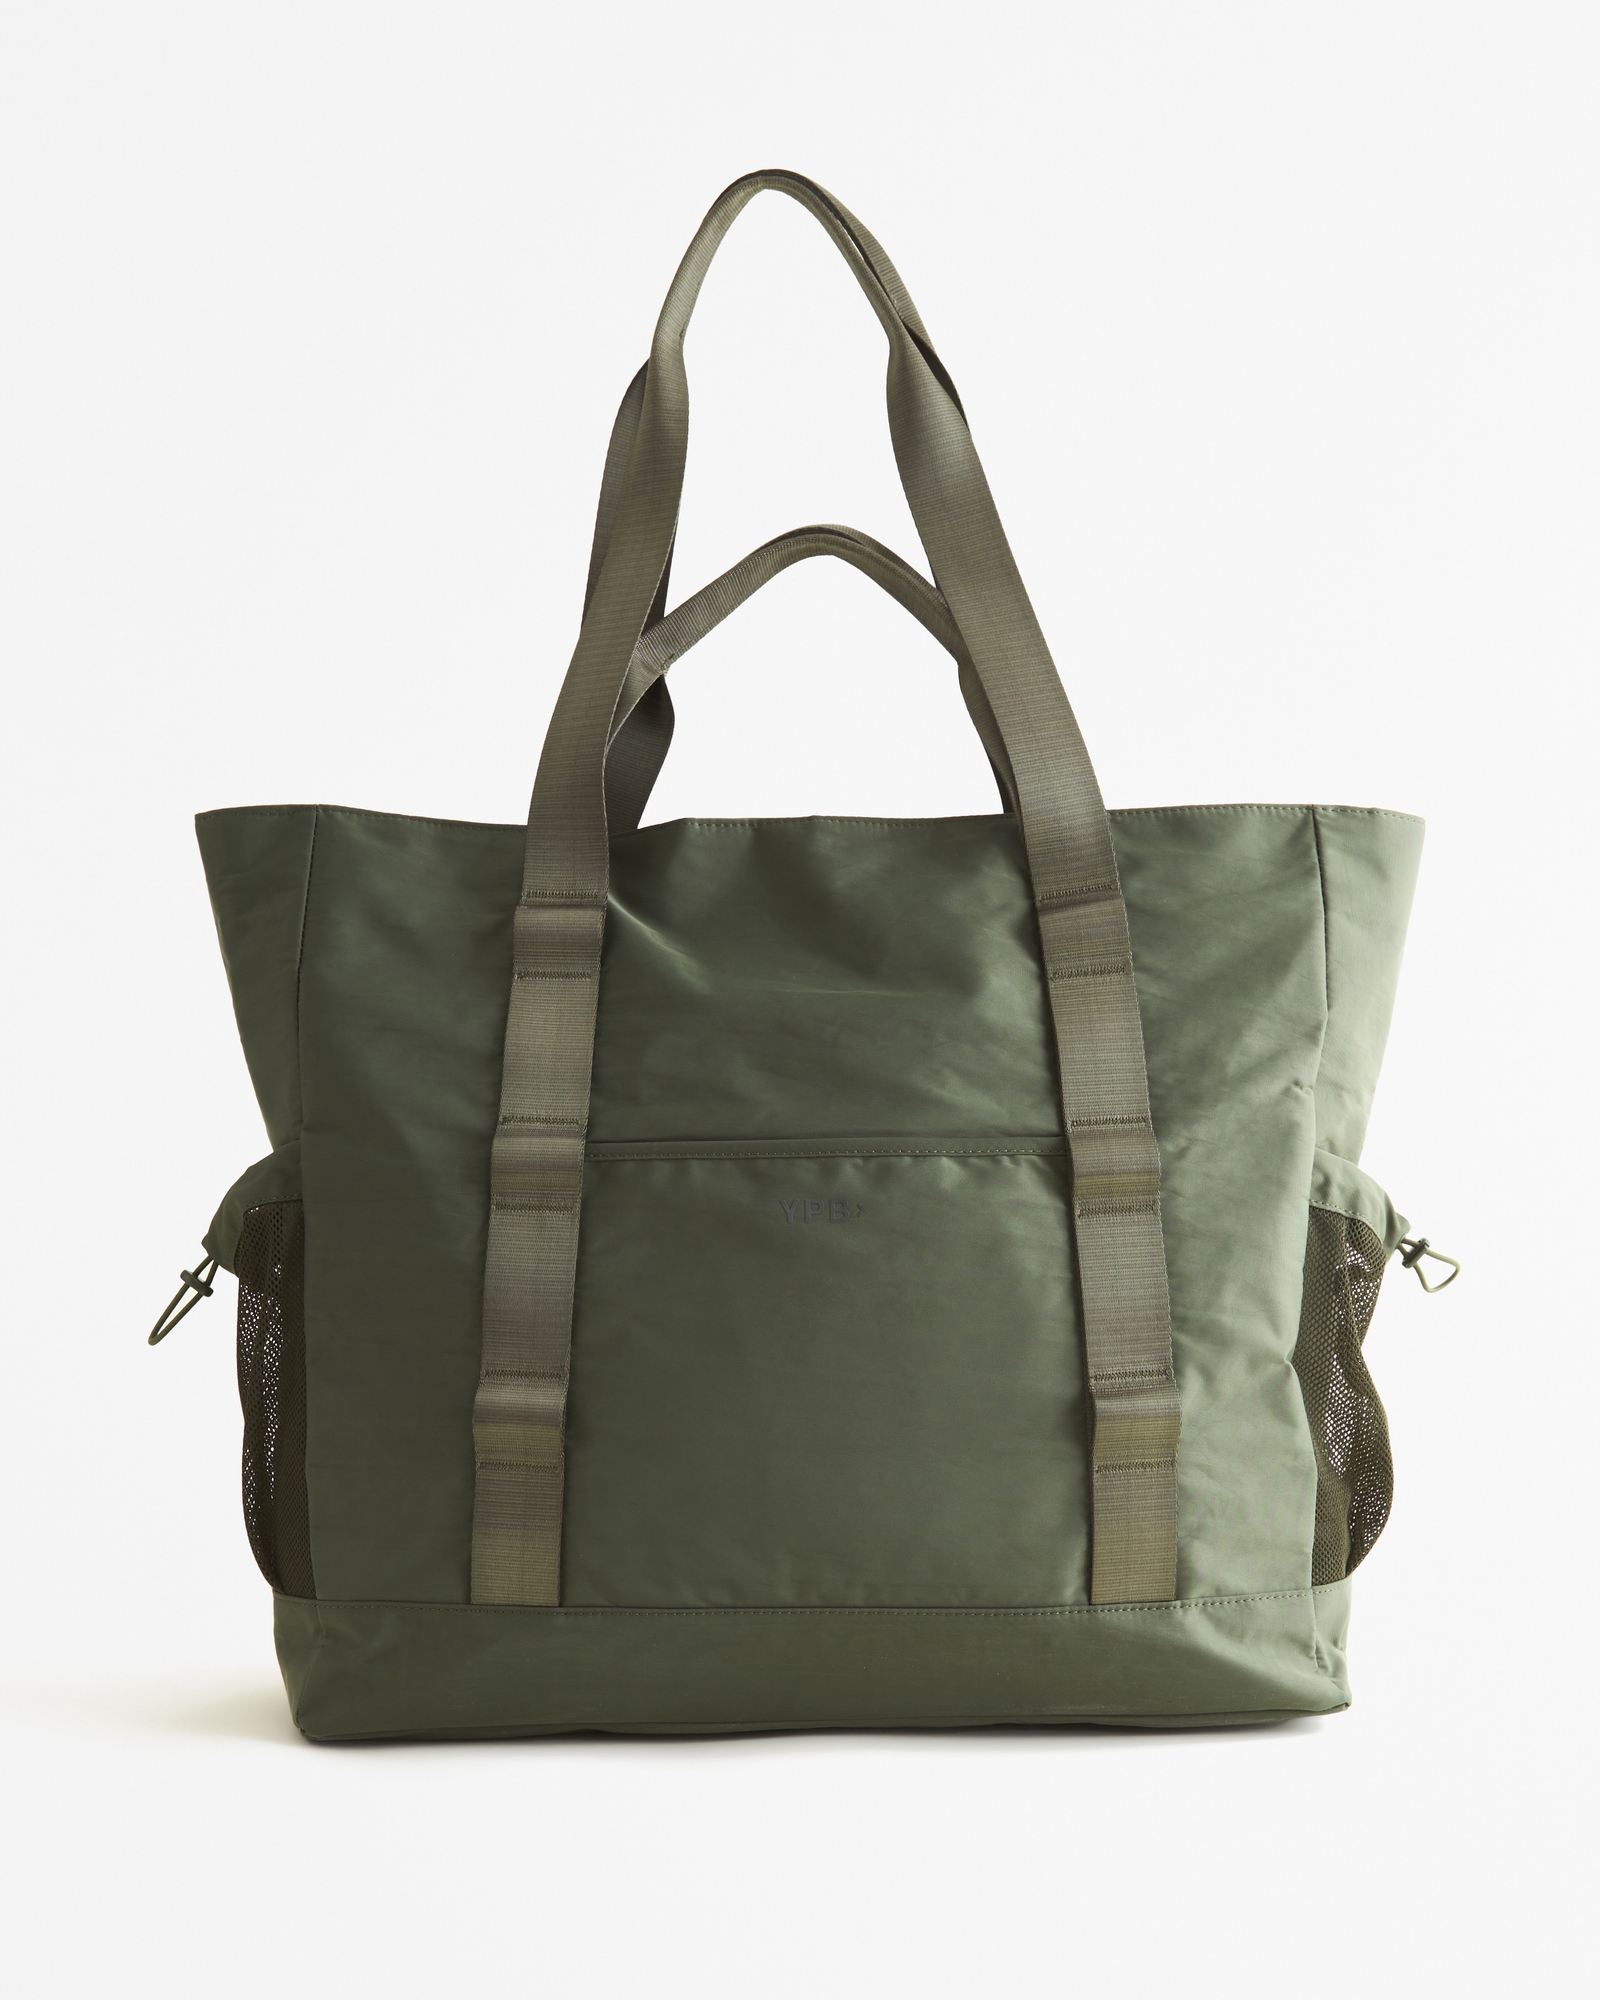 Abercrombie & Fitch Men's YPB Iconic Tote Bag